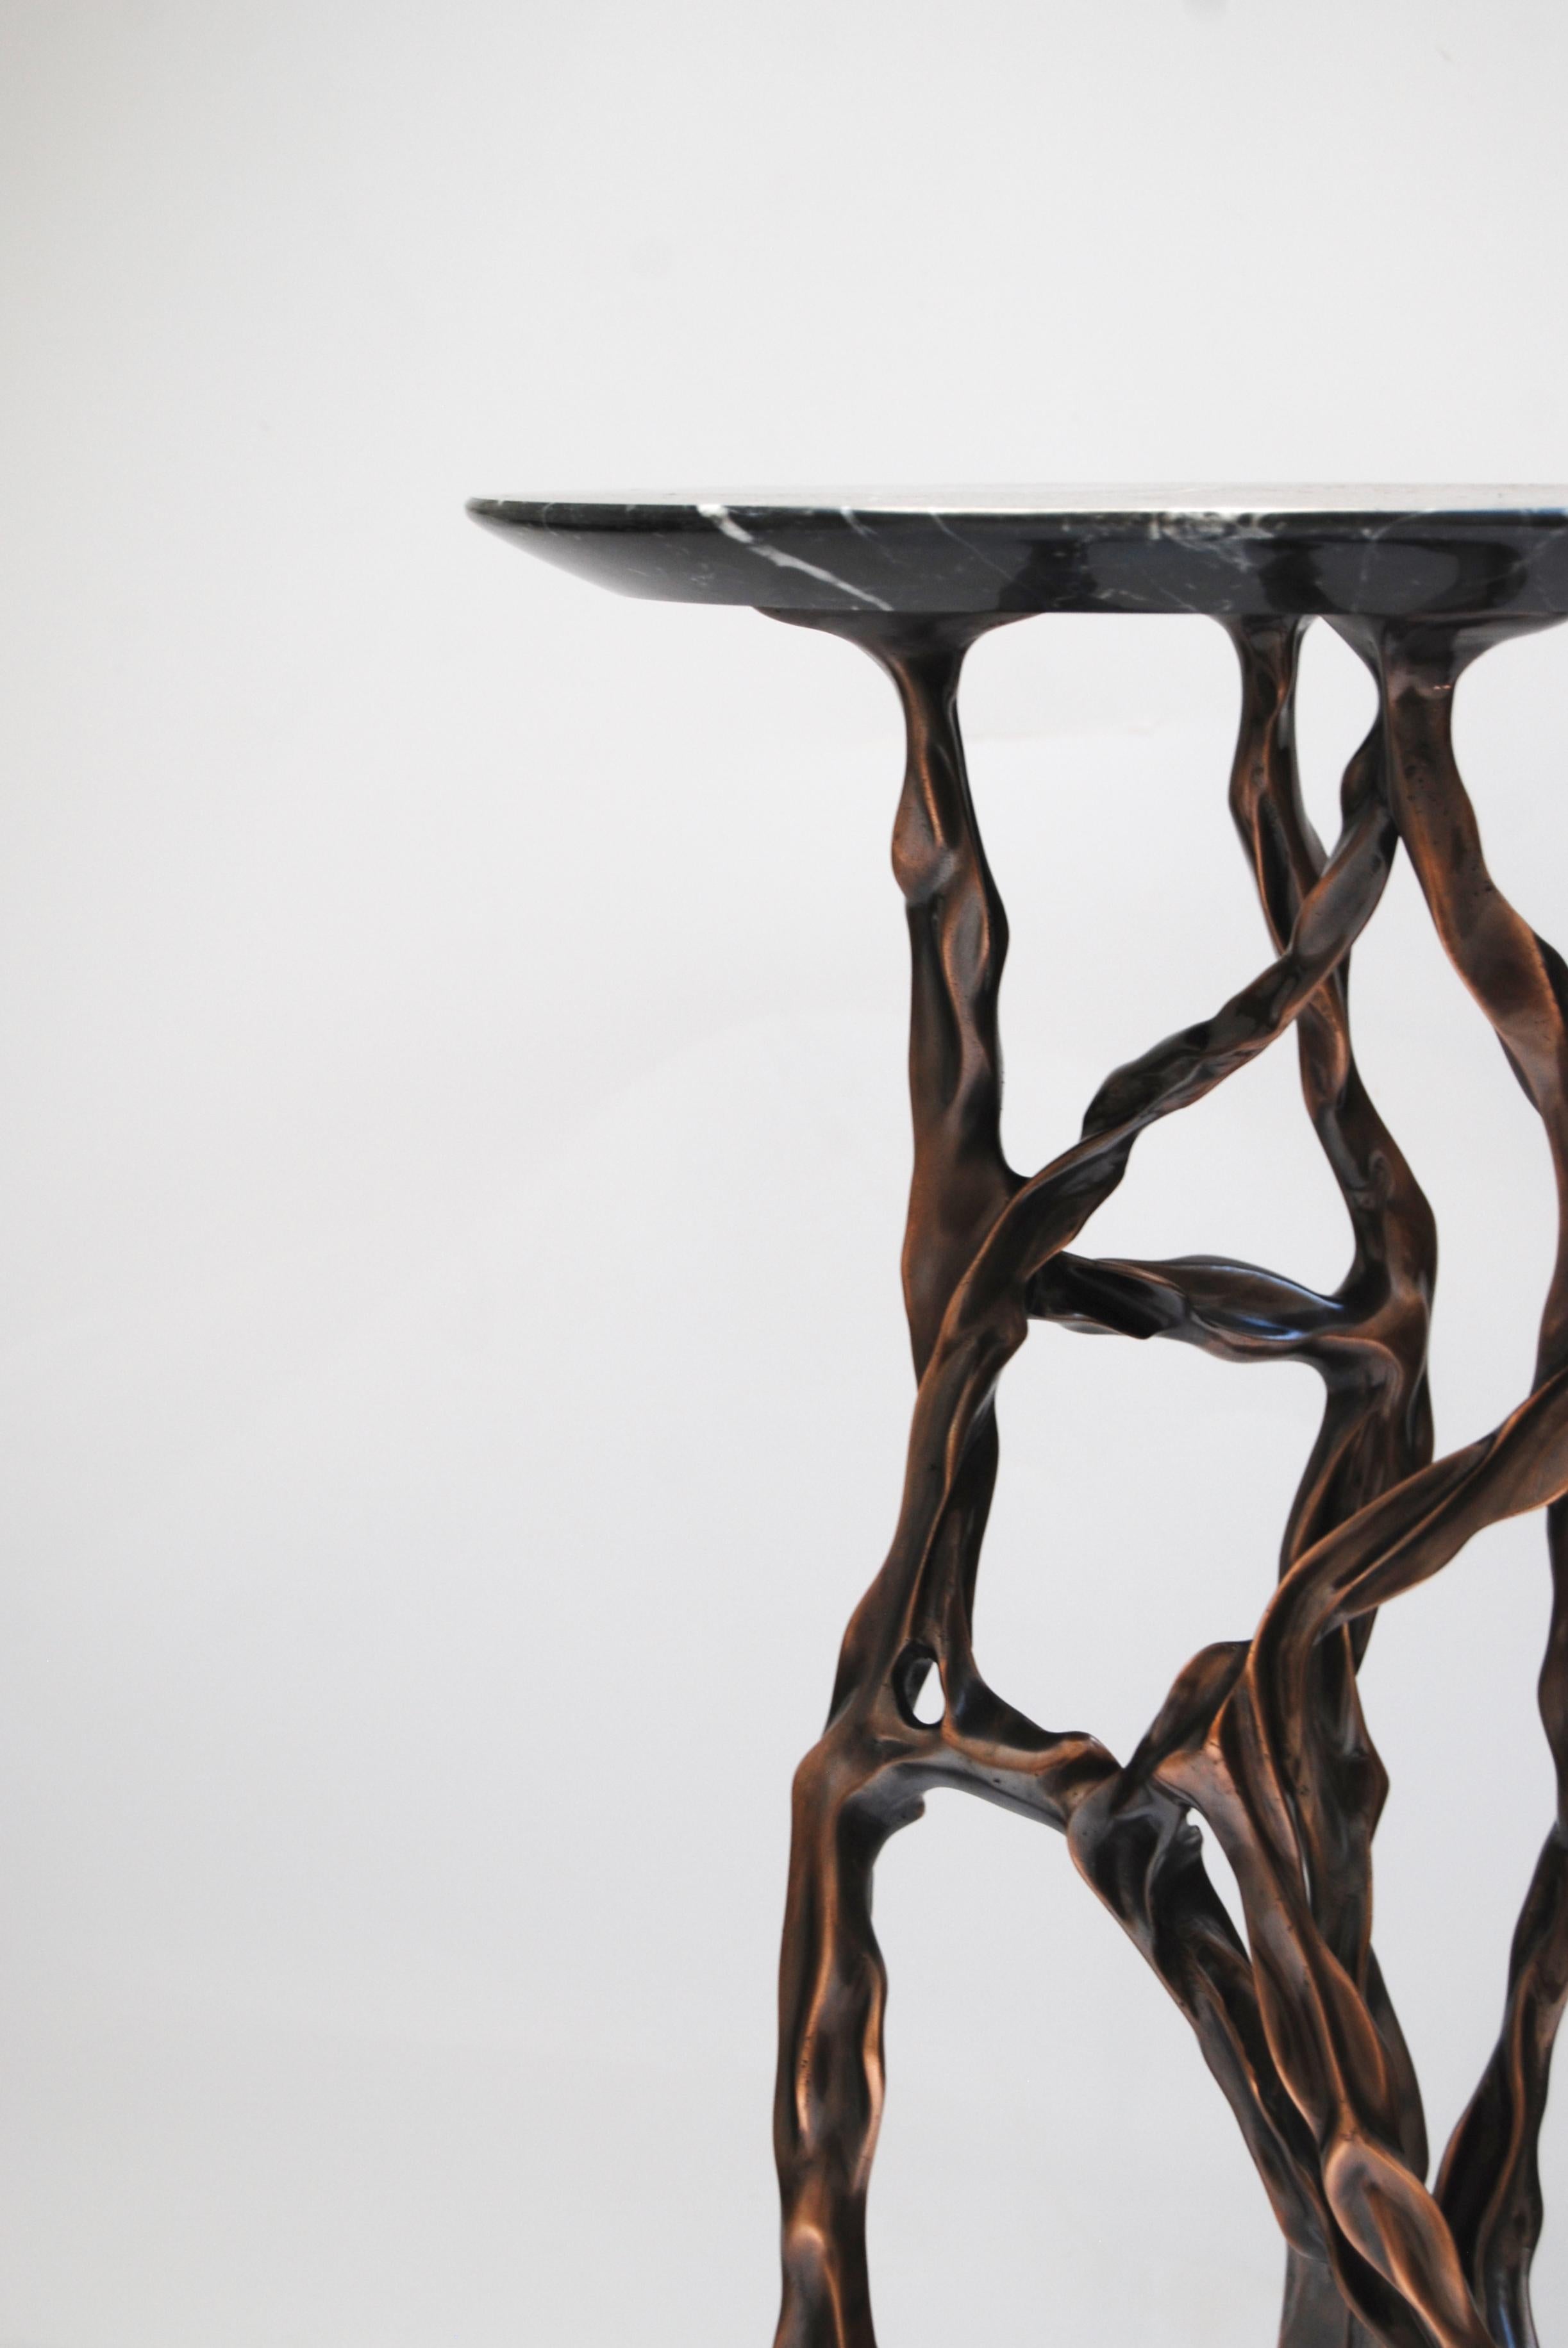 Dark Bronze Side Table with Marquina Marble Top by FAKASAKA Design
Dimensions: W 28 x D 28 x H 62 cm
Materials: Dark bronze, Nero Marquina marble.

